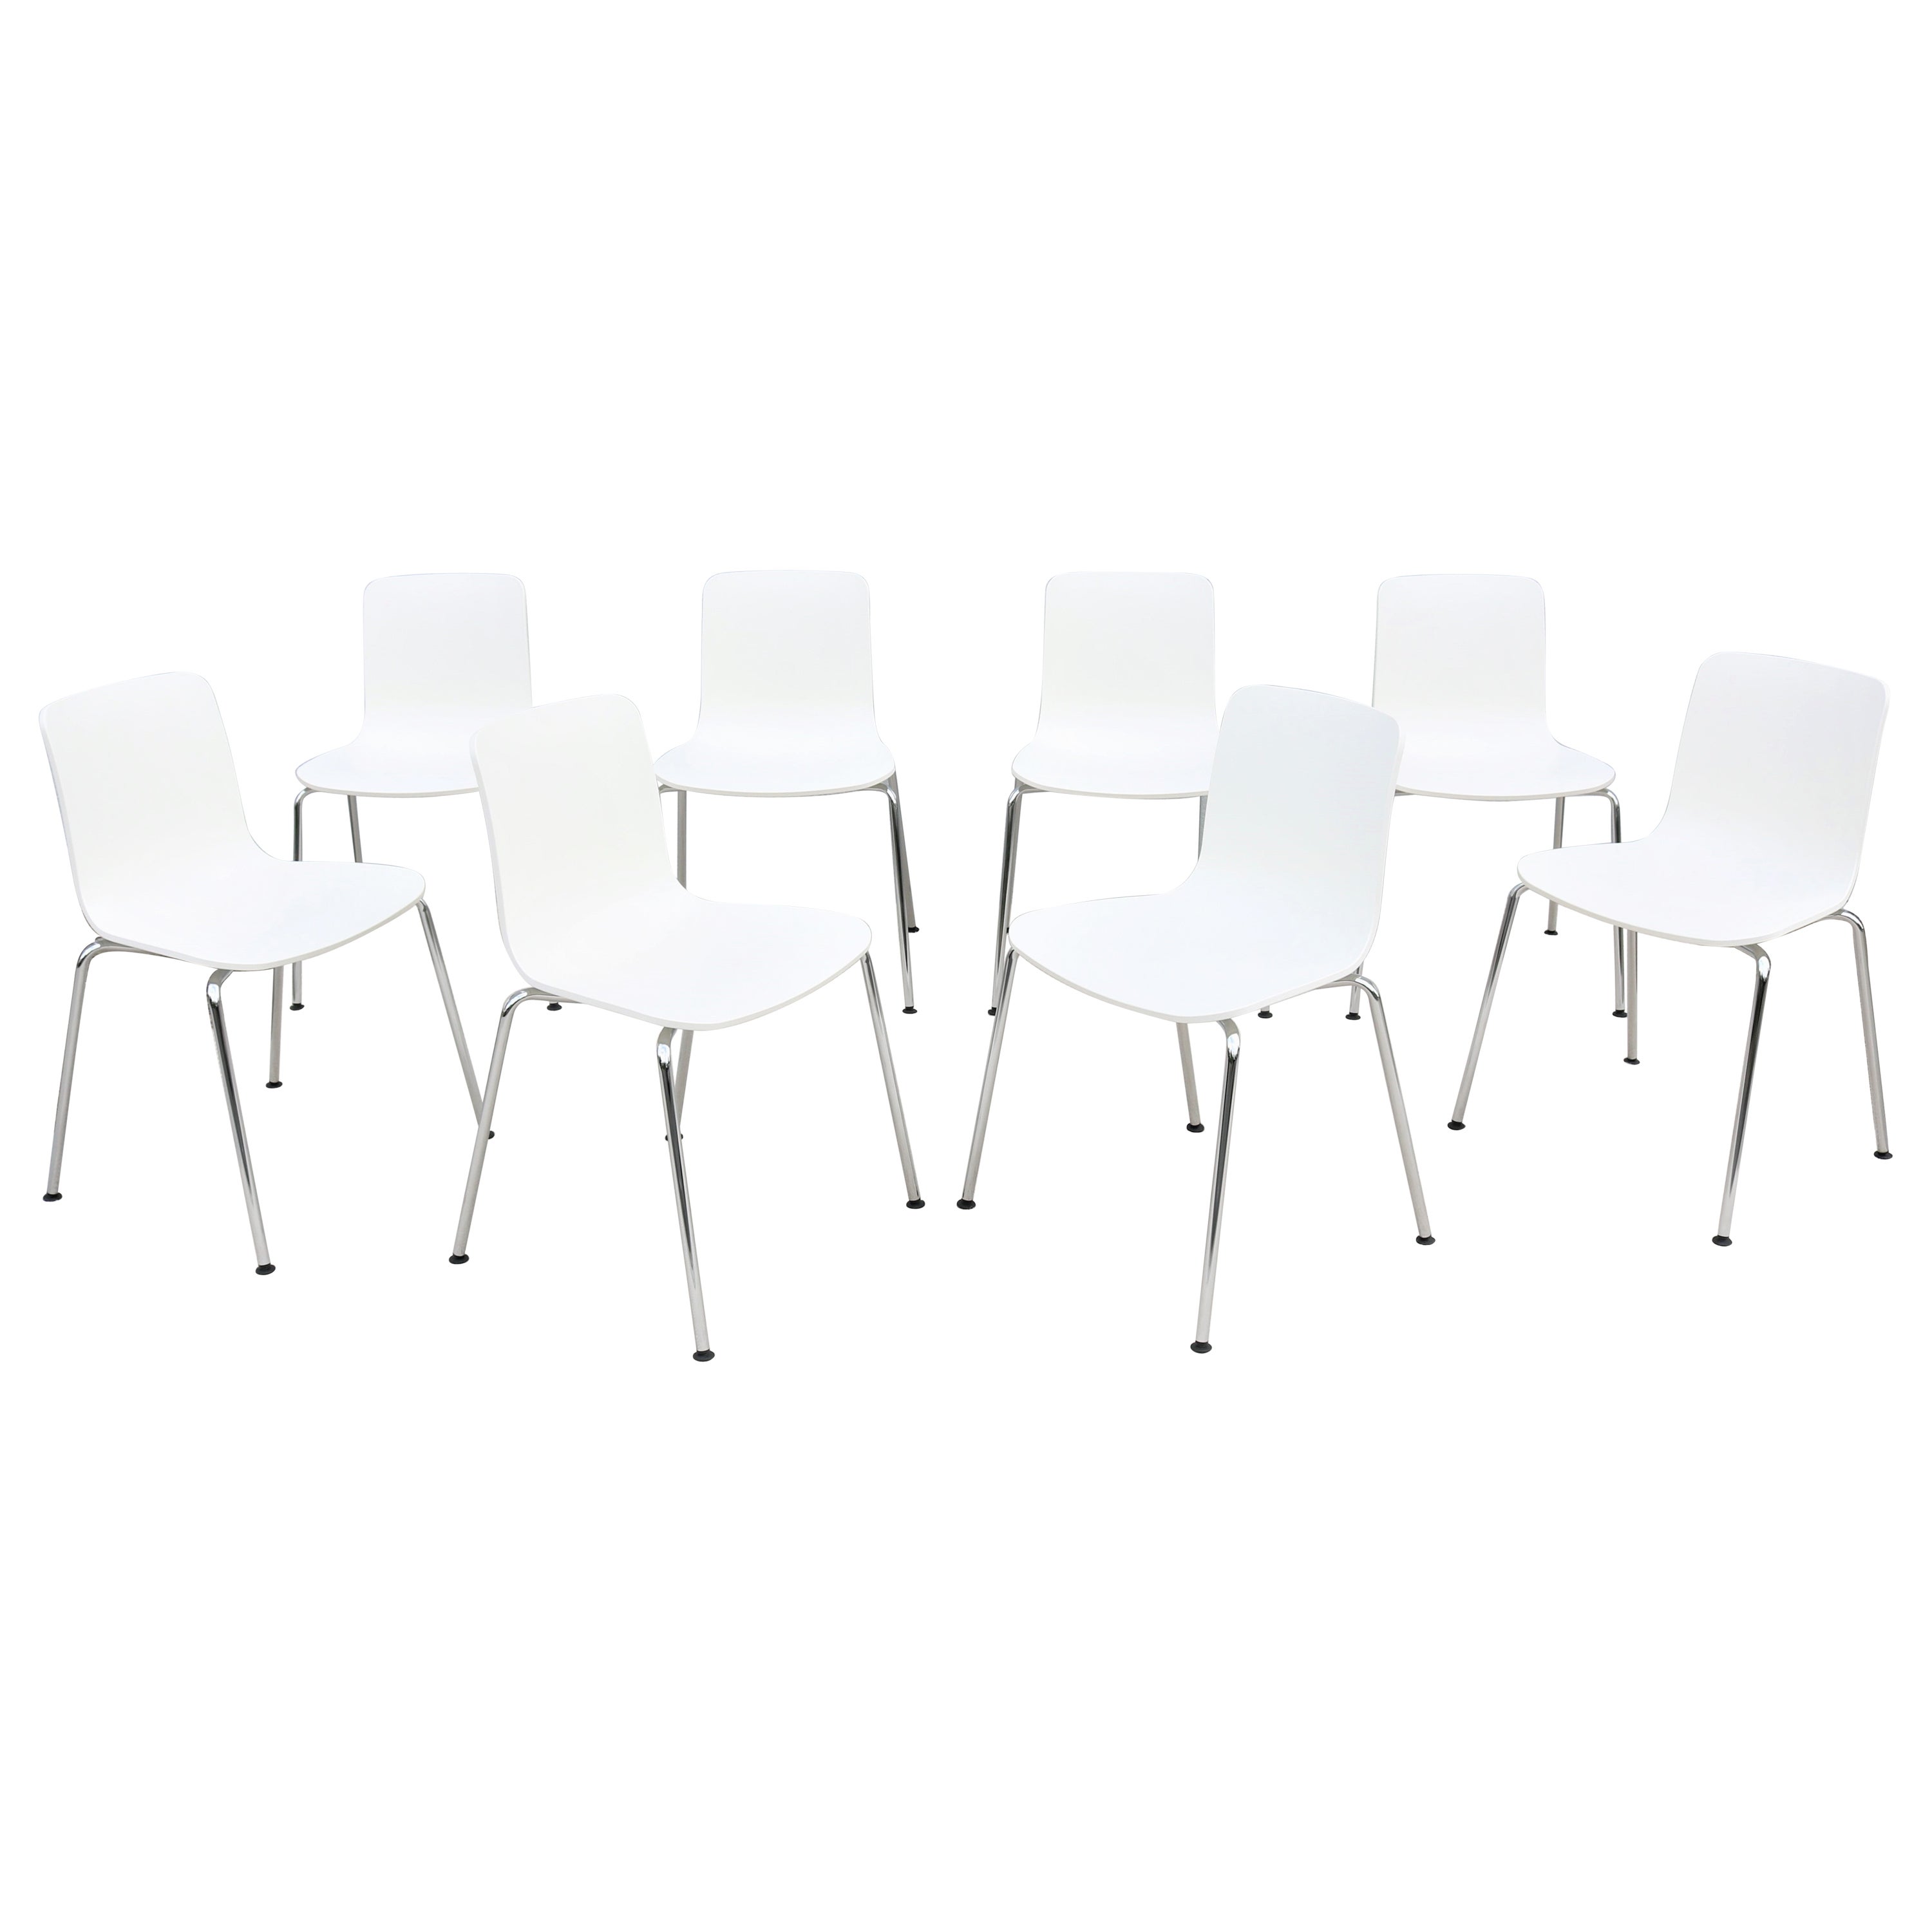 Modern Italy Jasper Morrison for Vitra HAL Tube Stackable Dining Chairs Set of 8 For Sale